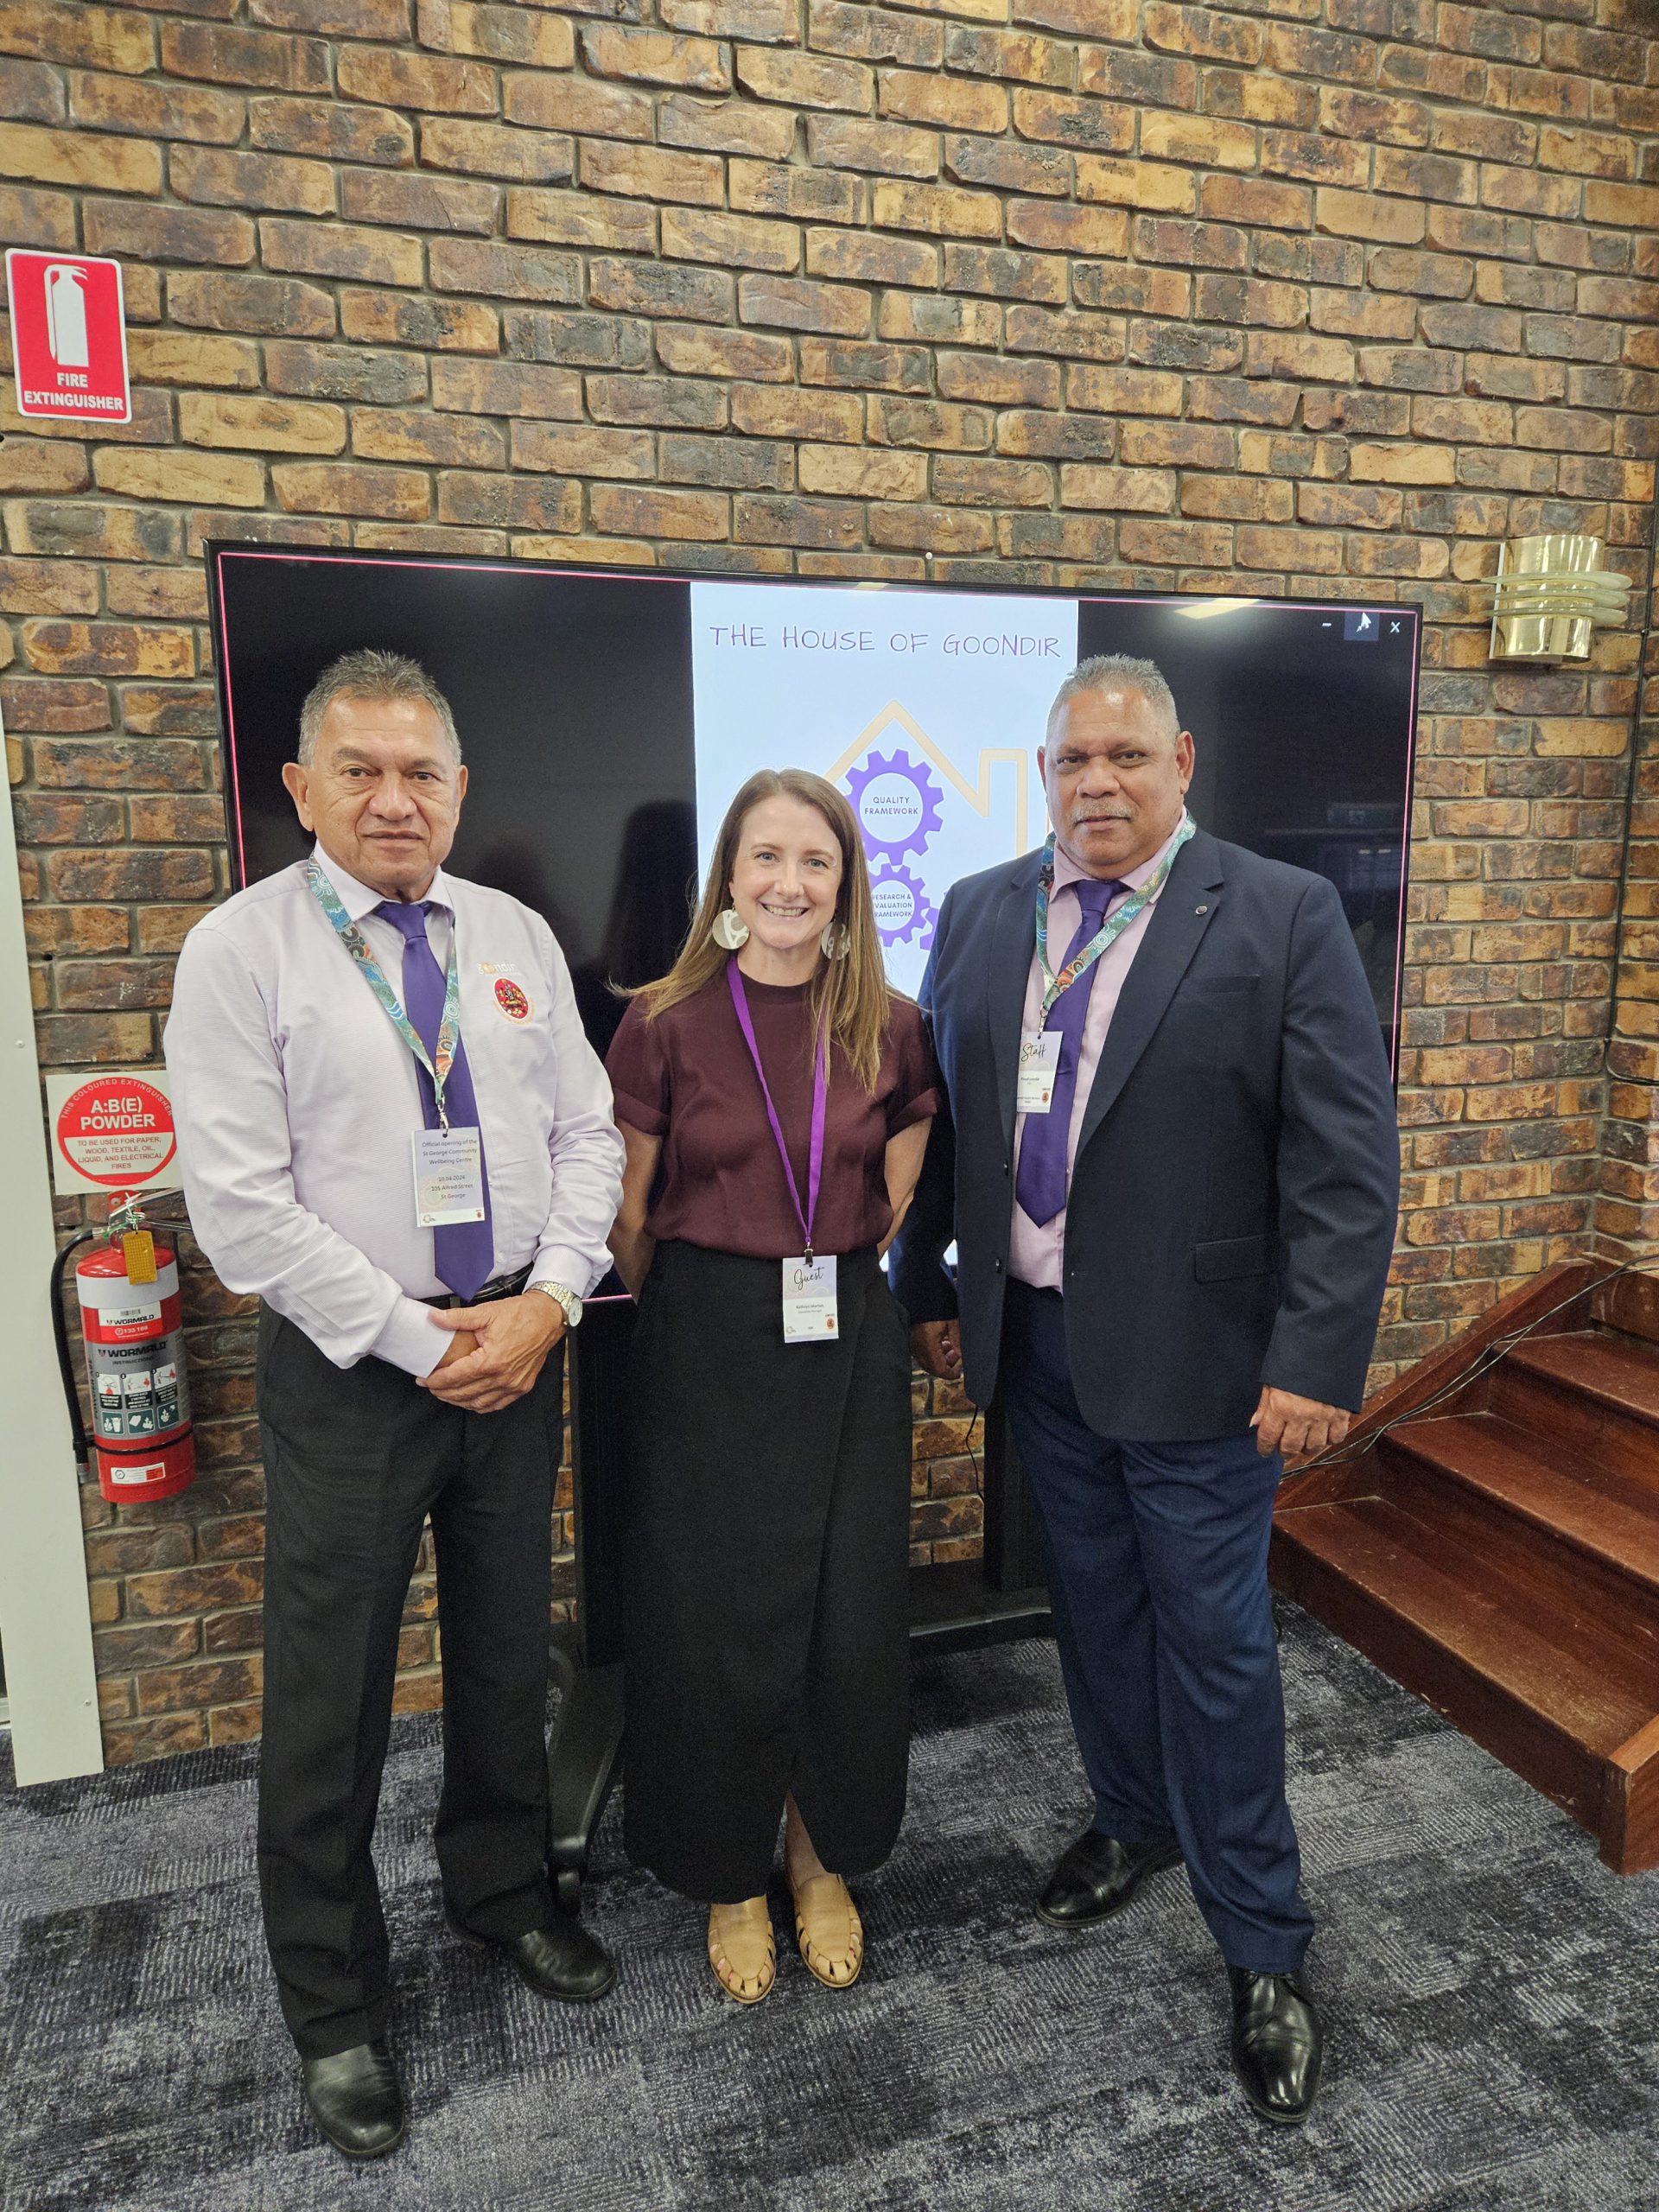 From left to right: Gary White (Goondir Health Services Chairperson), Kathryn Morton (Operations Manager - Eastern Division ILSC) and Floyd Leedie (Goondir Health Services CEO)